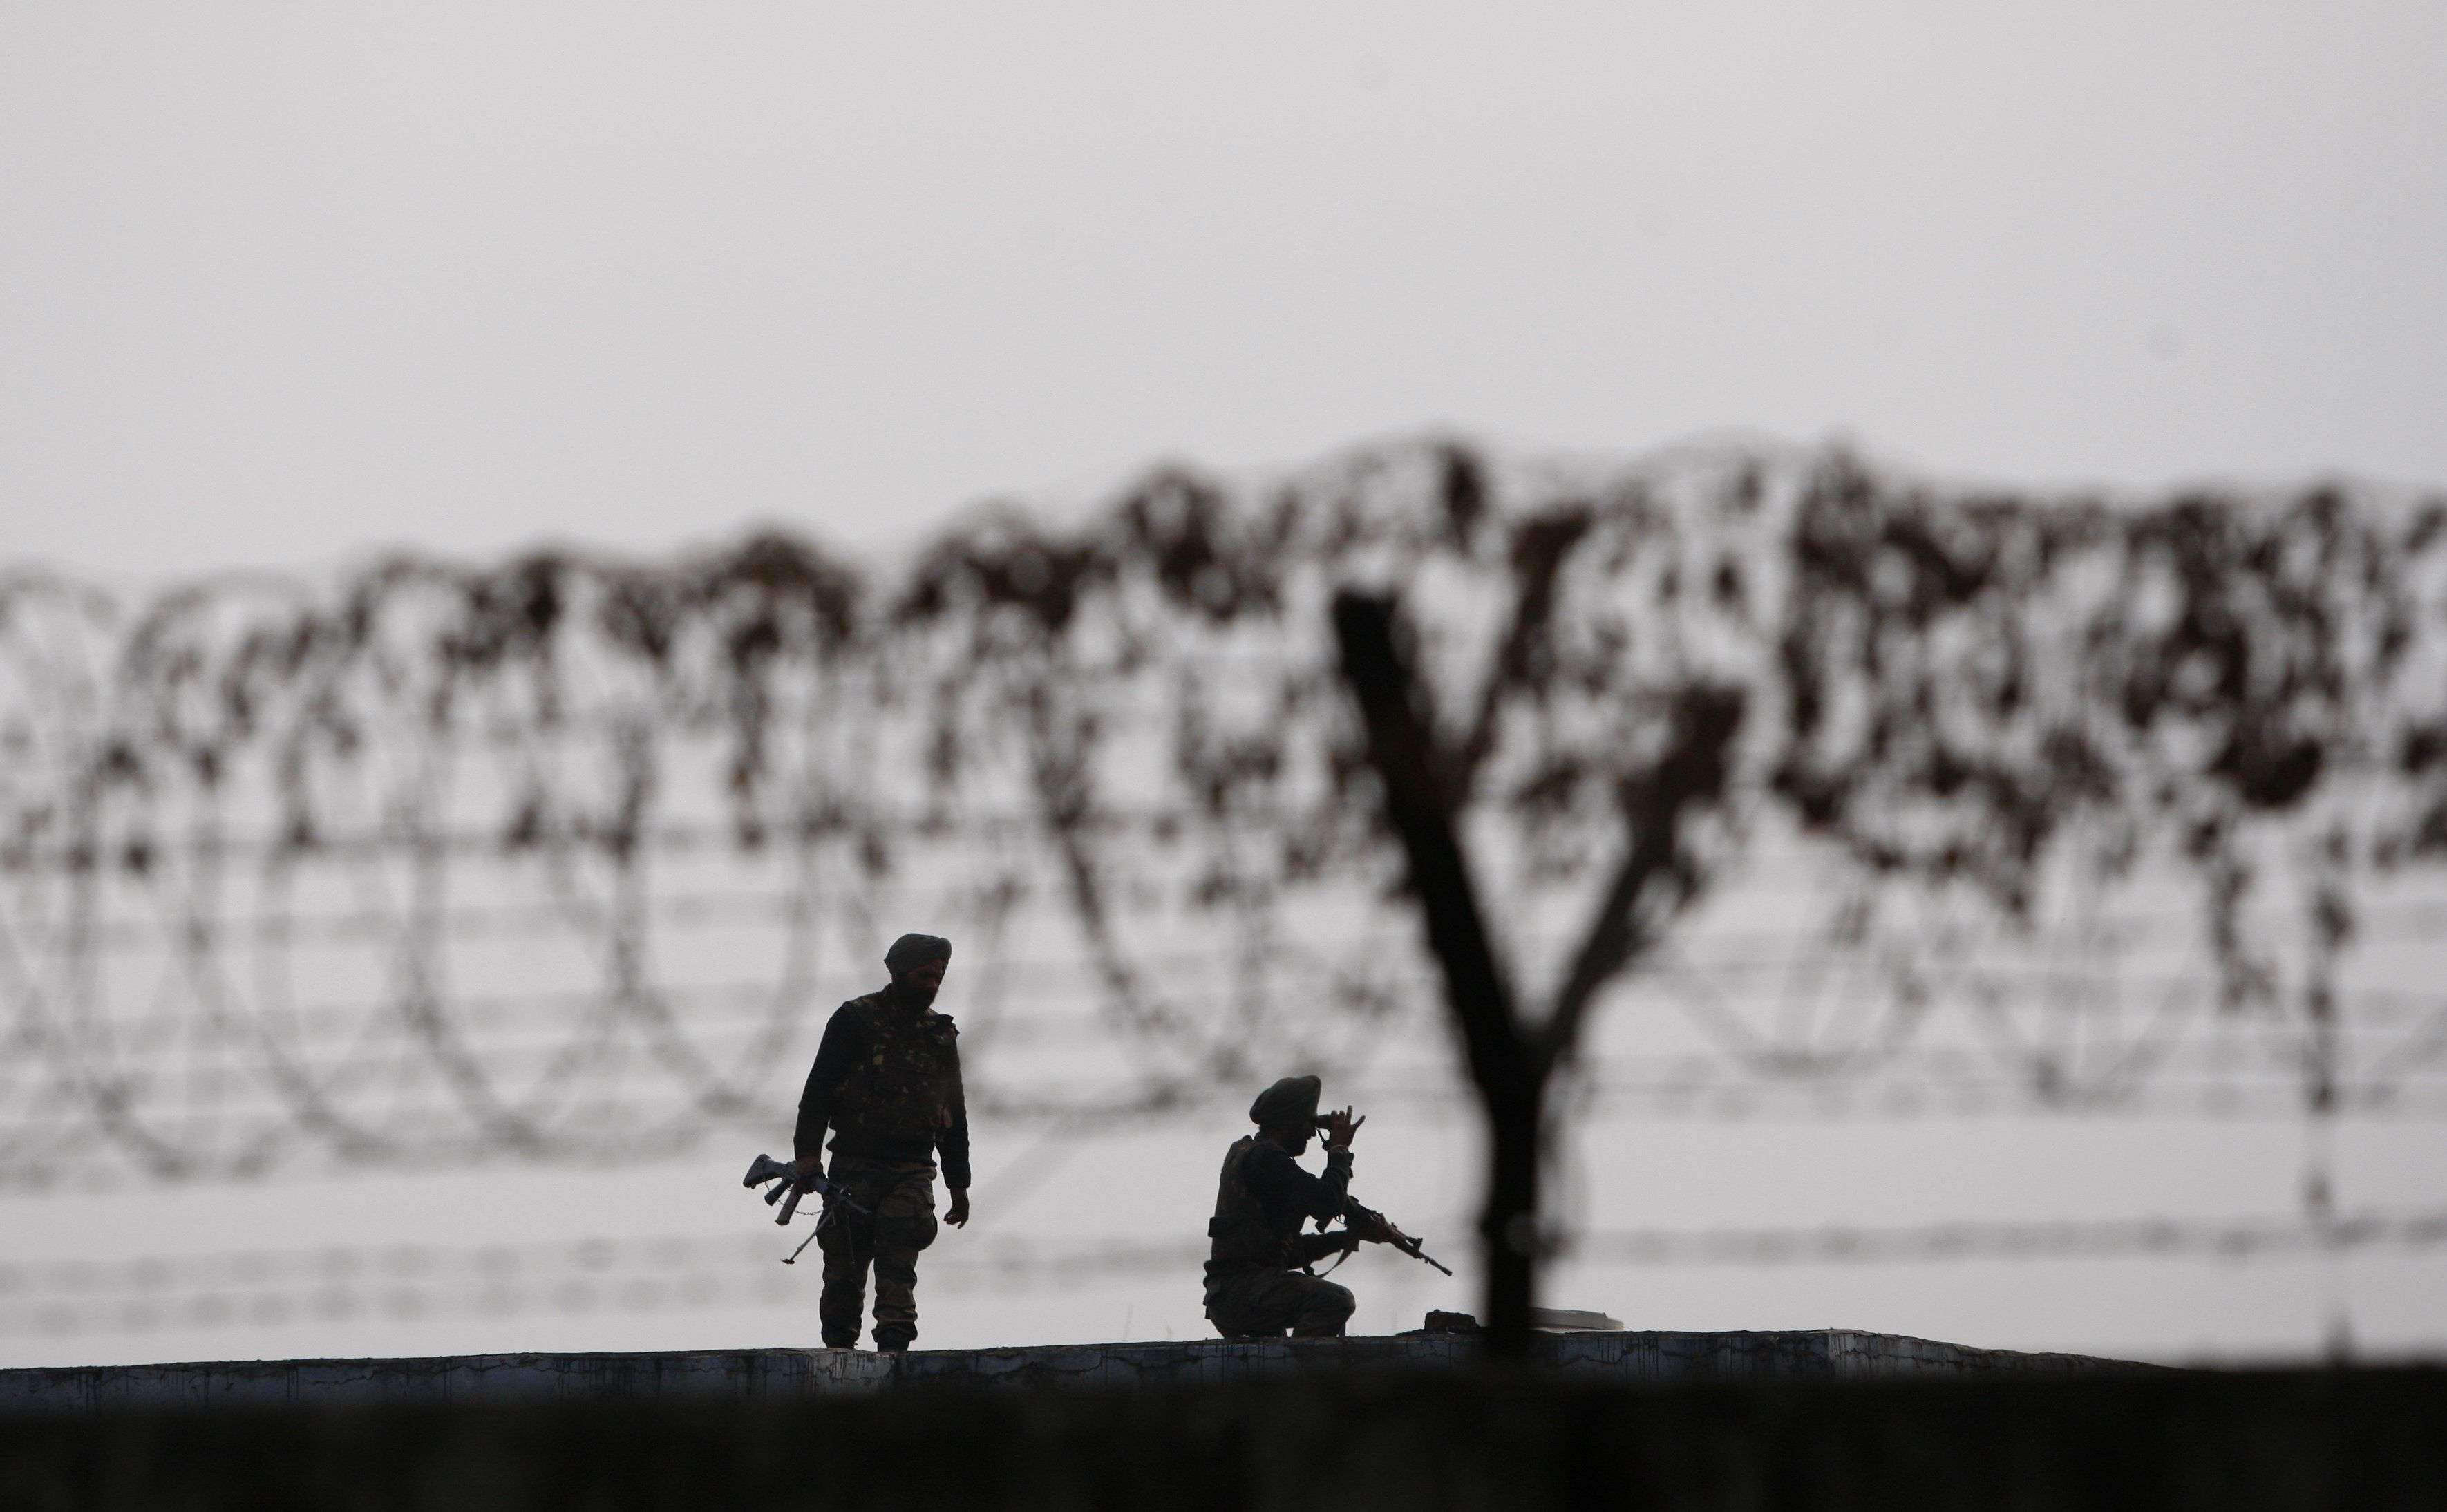 Indian soldiers keep guard at the perimeter fence of the Indian air force base in Pathankot, India, Wednesday, Jan. 6, 2016.  Indian defense minister Manohar Parrikar had said on Tuesday that Indian forces have killed the last of the six militants who attacked the air force base near the Pakistan border over the weekend, though soldiers are still searching the base as a precaution. (AP Photo/Channi Anand)